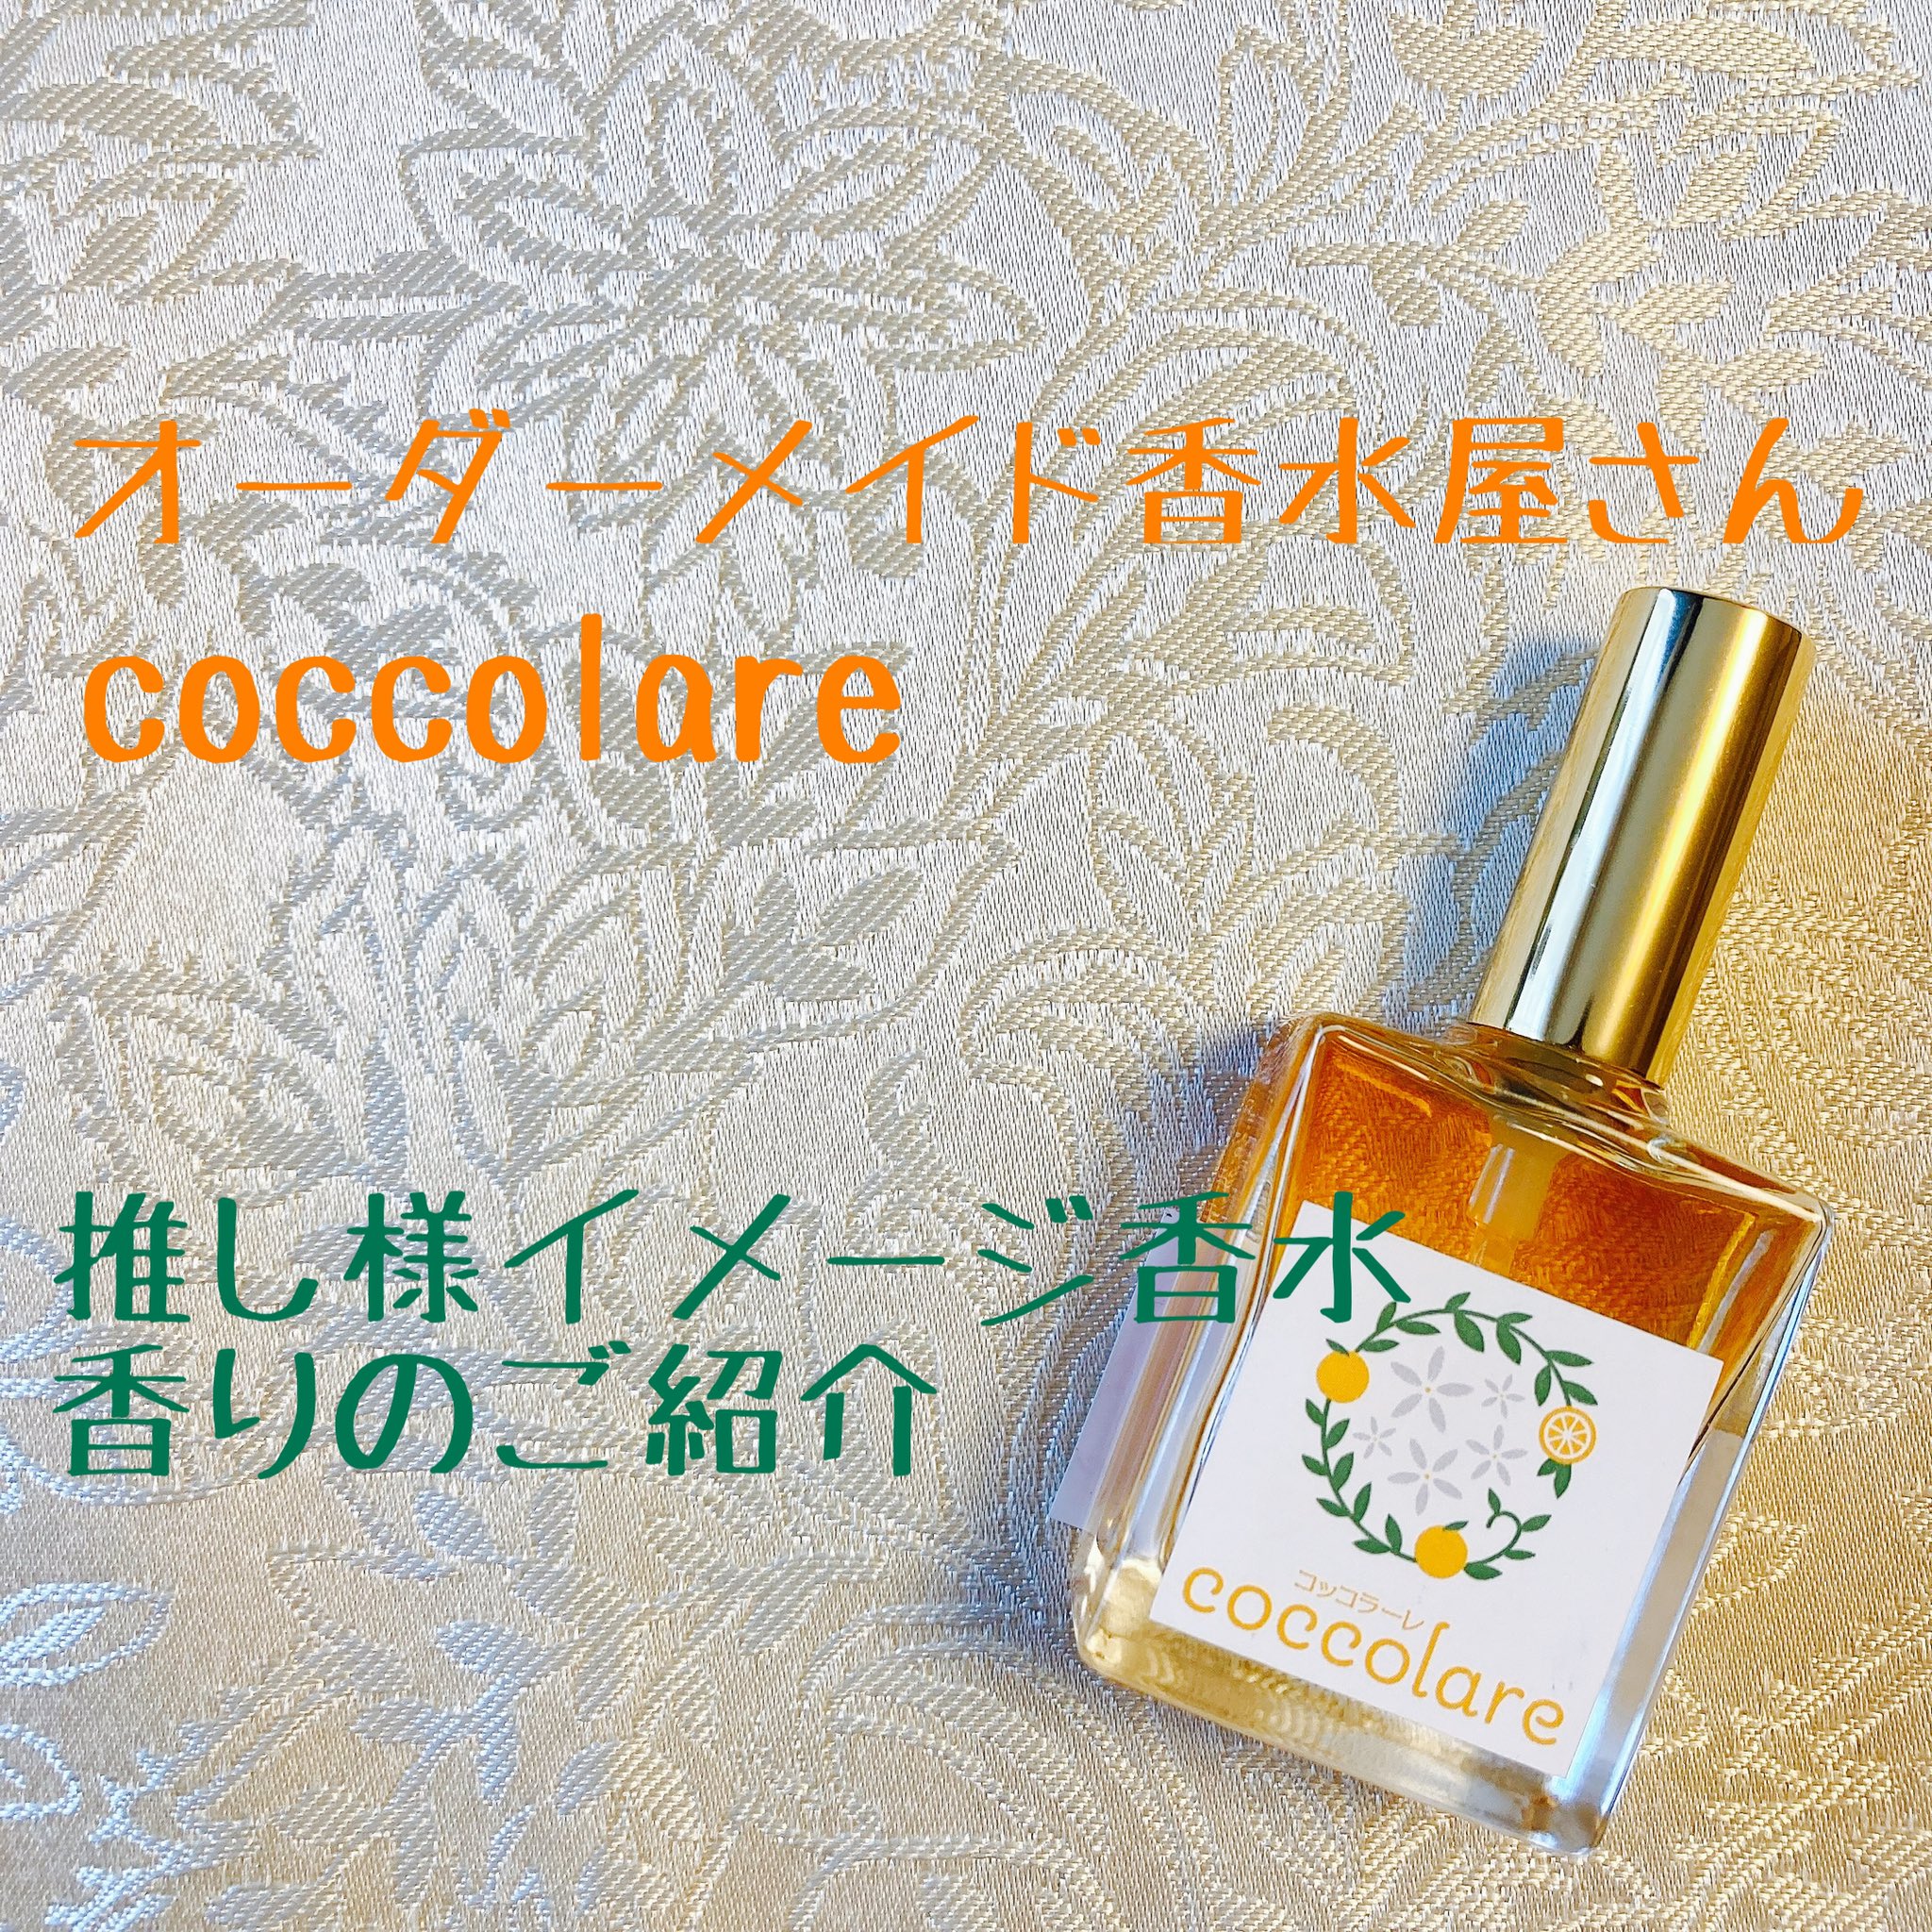 Coccolareの推し香水 Twitter Search Twitter